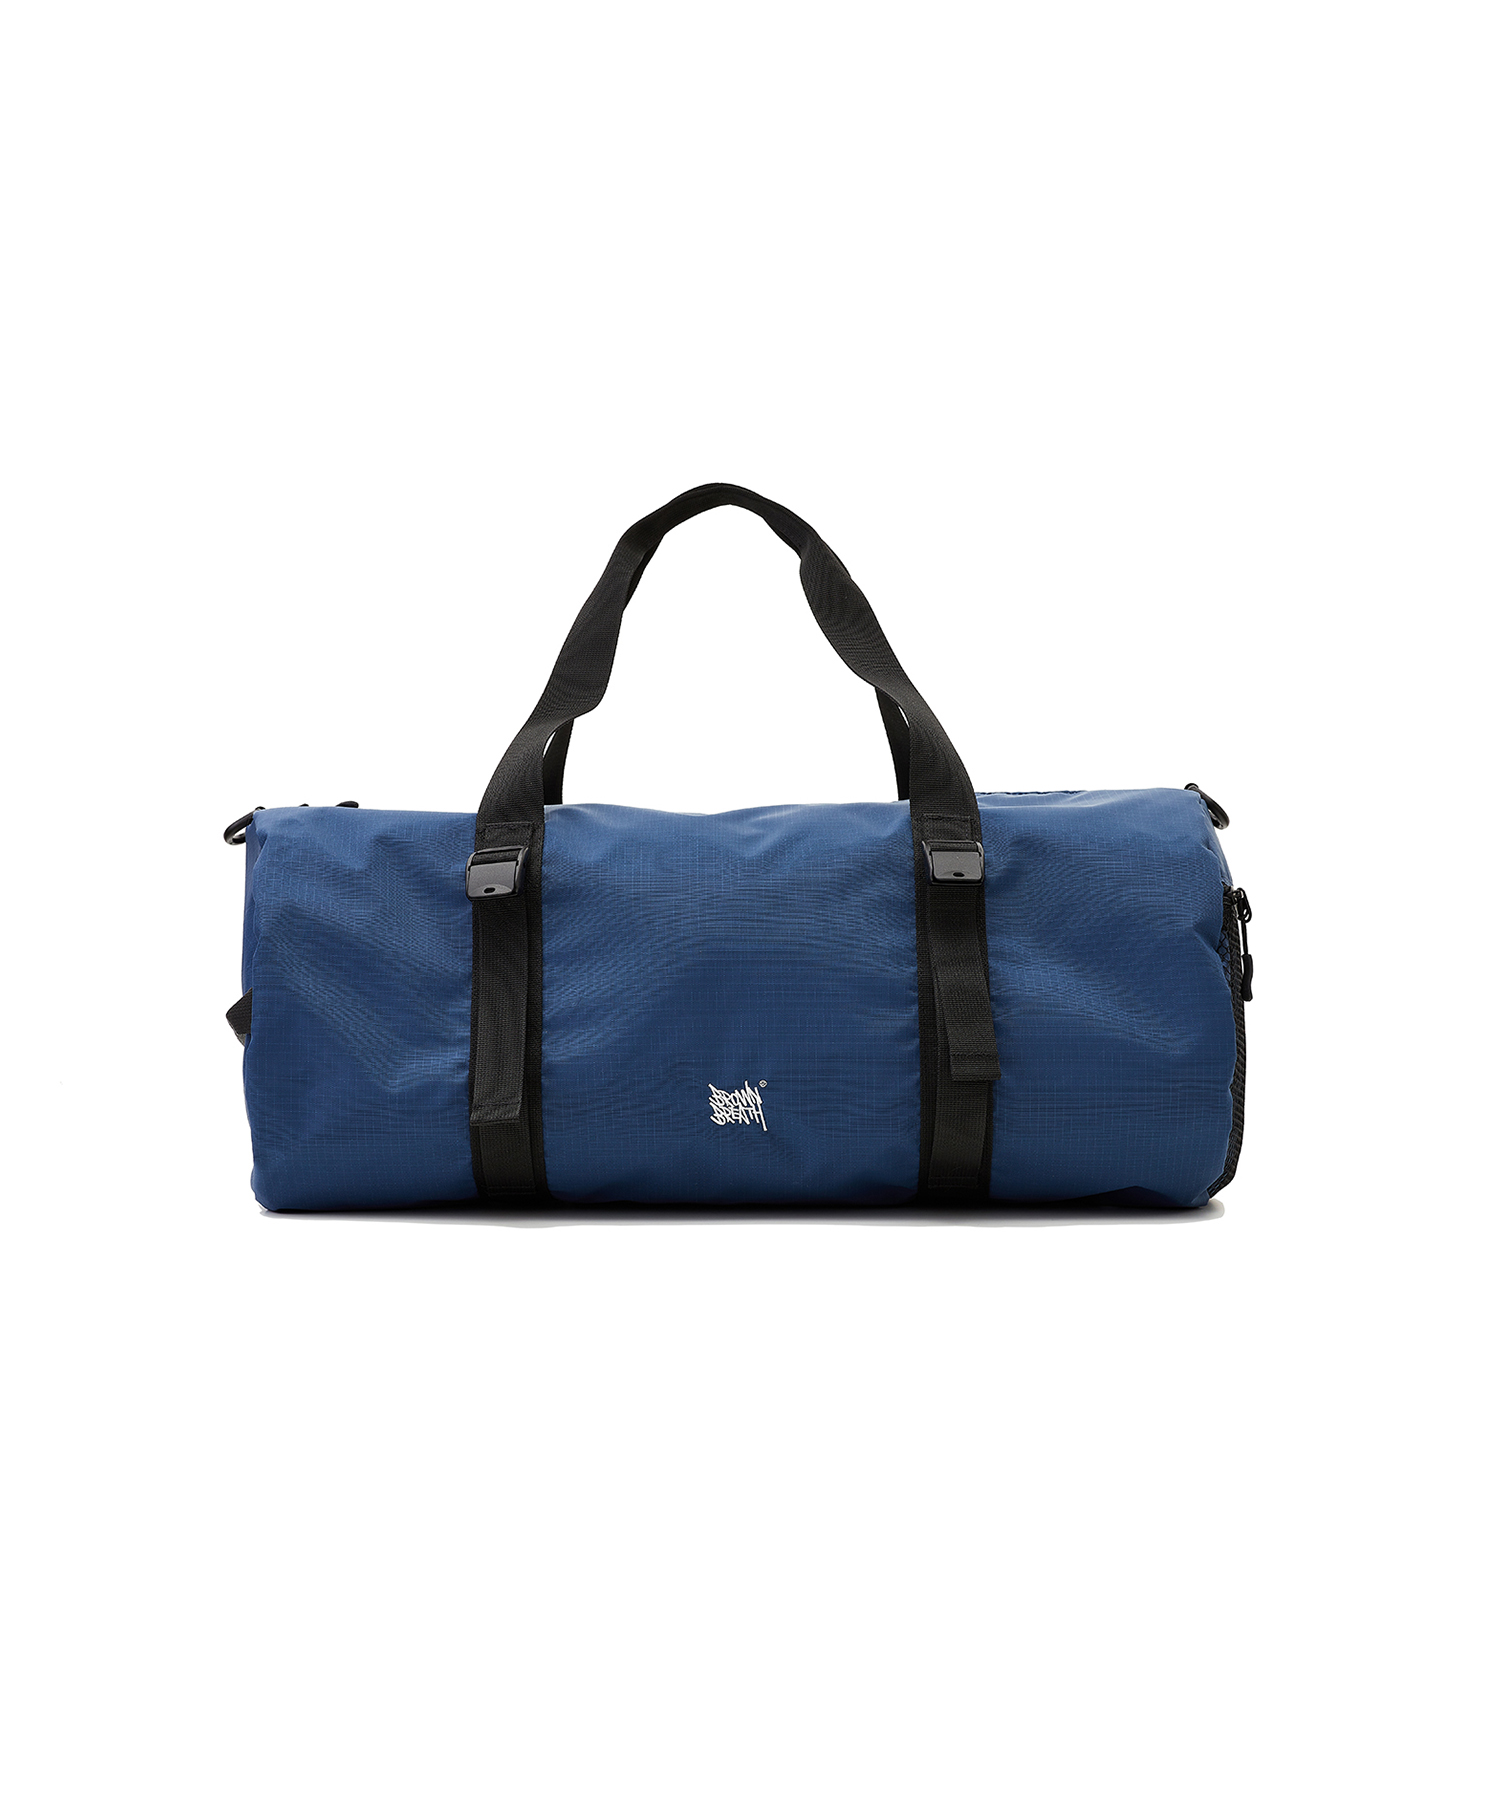 ACTS DUFFLE BAG - BLUE brownbreath